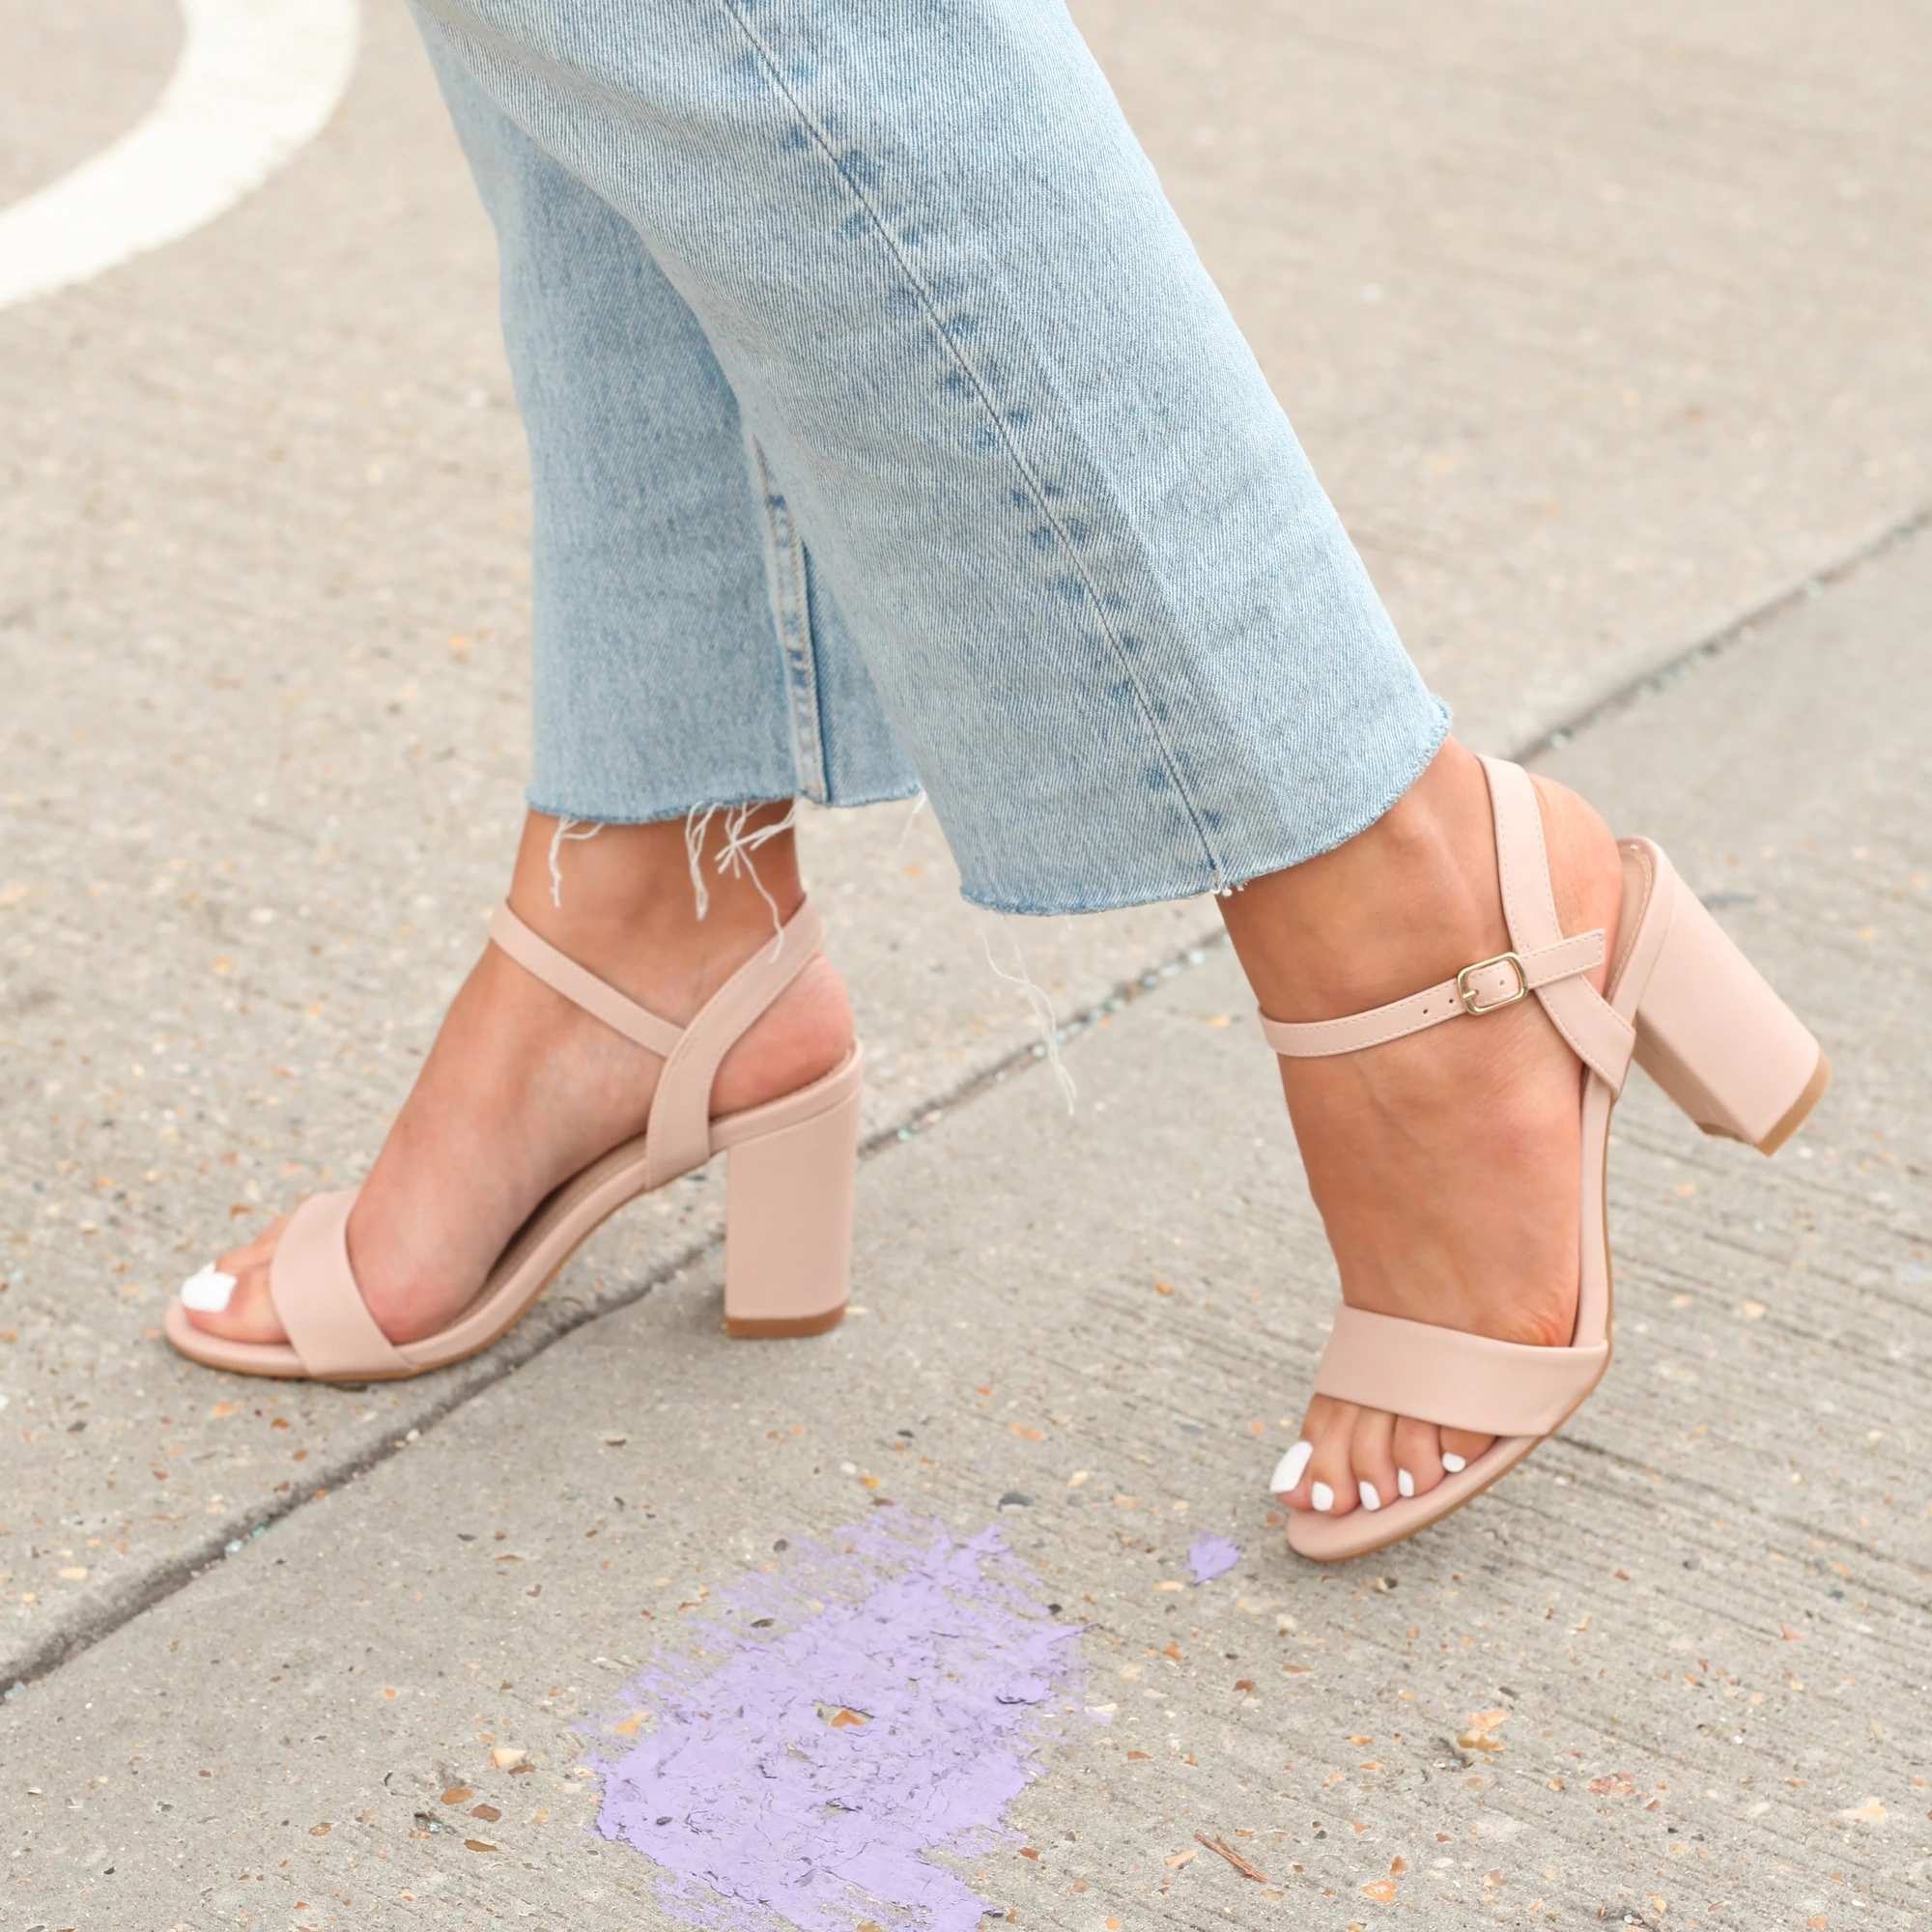 Black or Nude Heels: Which Ones Are Better?